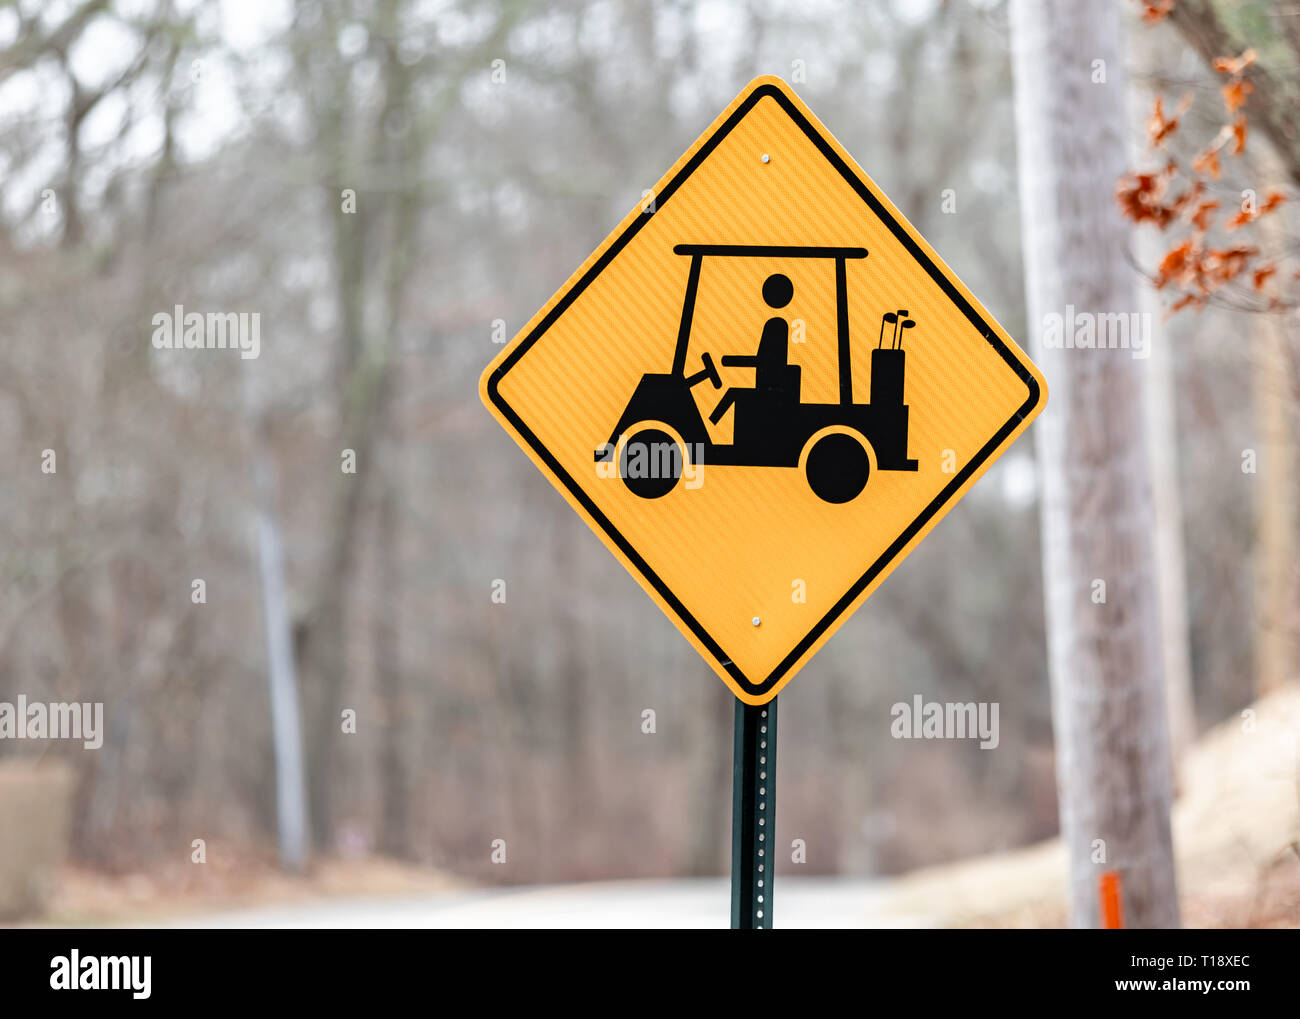 Yellow and black road sign depicting a golf cart and golfer Stock Photo